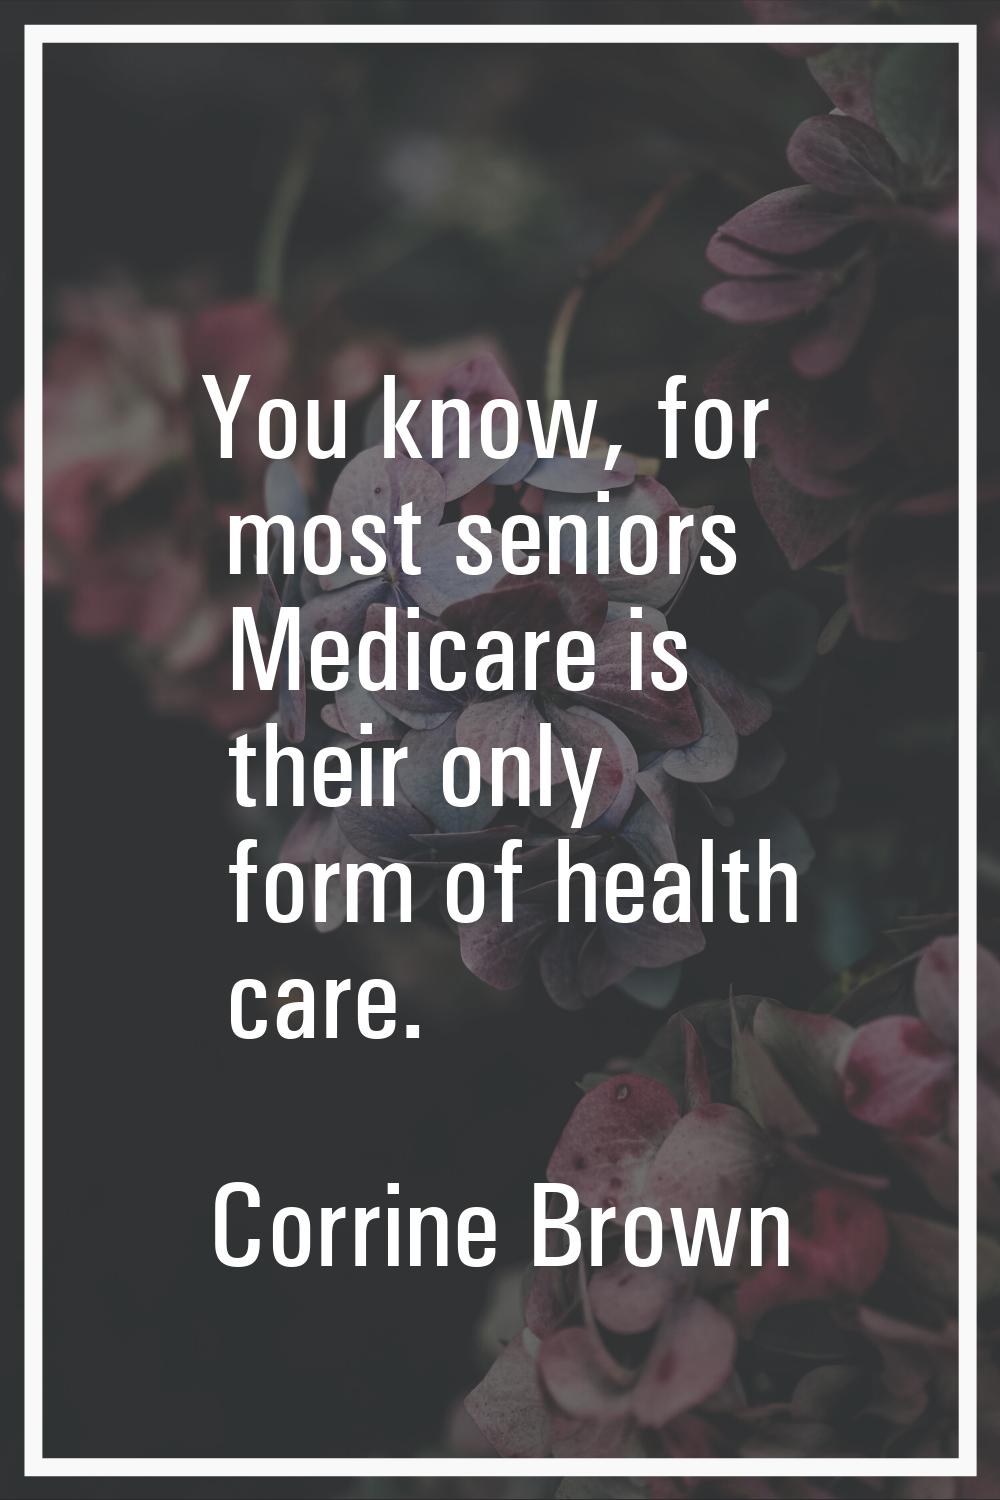 You know, for most seniors Medicare is their only form of health care.